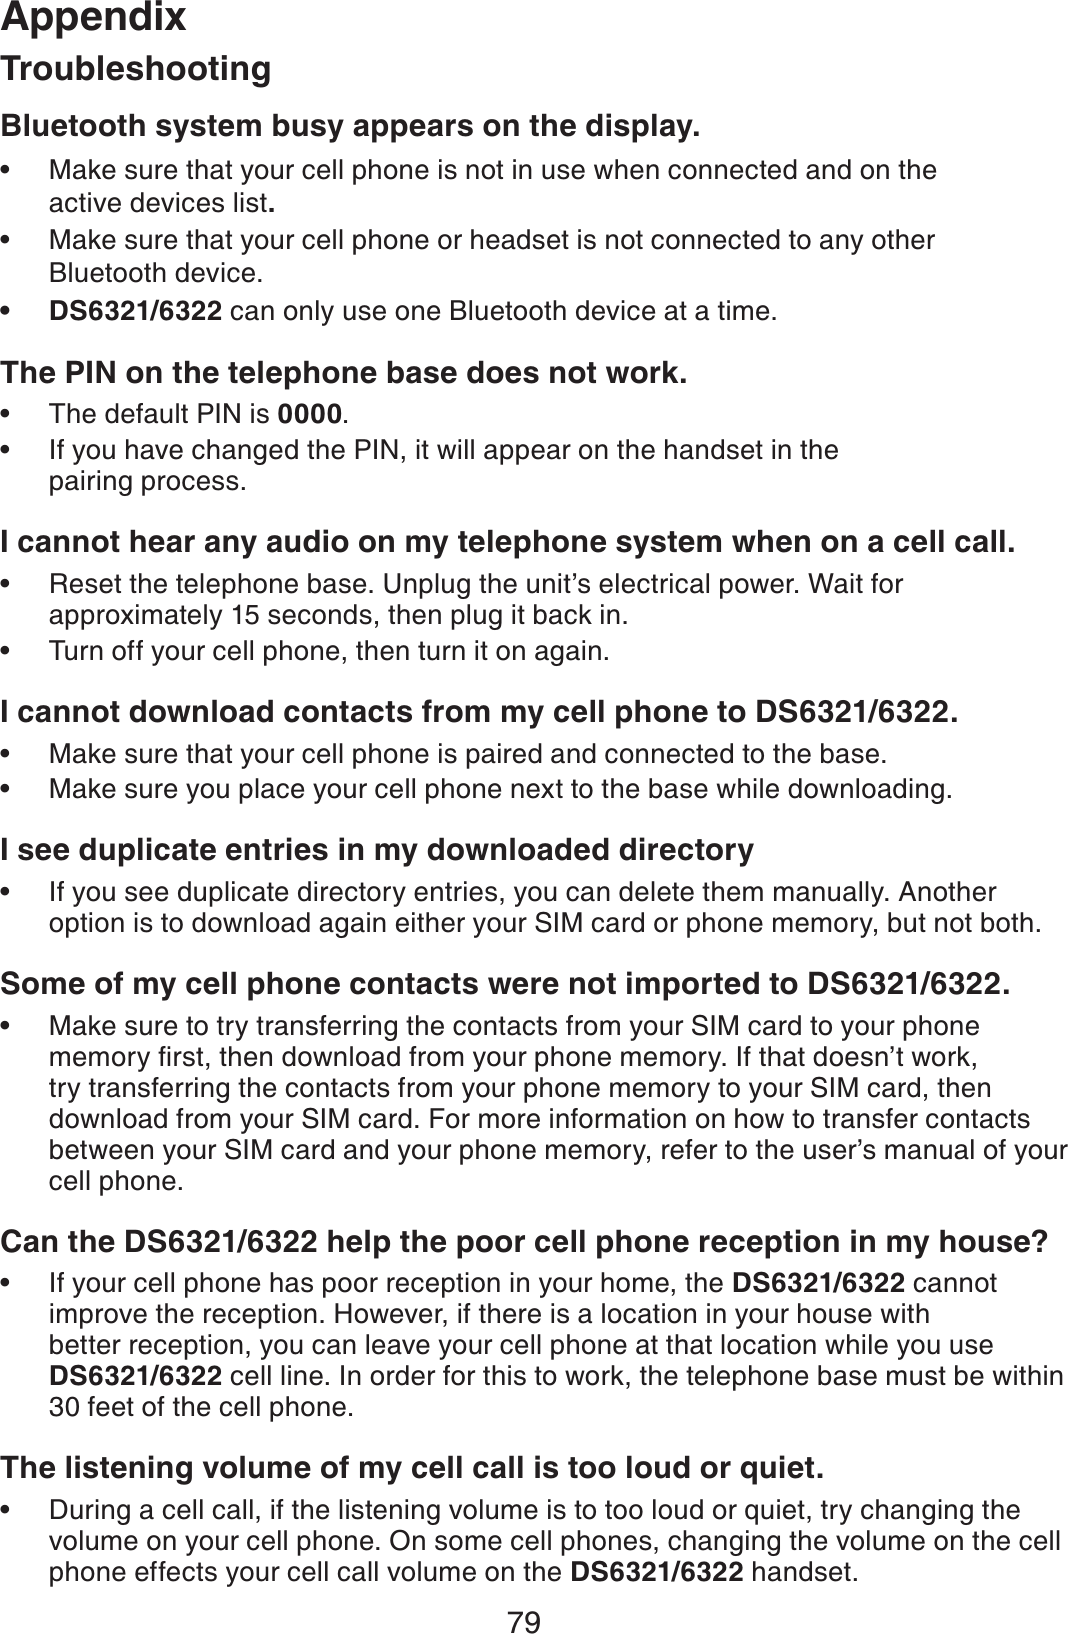 79AppendixBluetooth system busy appears on the display.Make sure that your cell phone is not in use when connected and on the active devices list.Make sure that your cell phone or headset is not connected to any other Bluetooth device.DS6321/6322 can only use one Bluetooth device at a time.The PIN on the telephone base does not work.The default PIN is 0000.If you have changed the PIN, it will appear on the handset in the pairing process.I cannot hear any audio on my telephone system when on a cell call.Reset the telephone base. Unplug the unit’s electrical power. Wait for approximately 15 seconds, then plug it back in.Turn off your cell phone, then turn it on again.I cannot download contacts from my cell phone to DS6321/6322.Make sure that your cell phone is paired and connected to the base.Make sure you place your cell phone next to the base while downloading.I see duplicate entries in my downloaded directoryIf you see duplicate directory entries, you can delete them manually. Another option is to download again either your SIM card or phone memory, but not both.Some of my cell phone contacts were not imported to DS6321/6322.Make sure to try transferring the contacts from your SIM card to your phone OGOQT[ſTUVVJGPFQYPNQCFHTQO[QWTRJQPGOGOQT[+HVJCVFQGUPŏVYQTMtry transferring the contacts from your phone memory to your SIM card, then download from your SIM card. For more information on how to transfer contacts between your SIM card and your phone memory, refer to the user’s manual of your cell phone.Can the DS6321/6322 help the poor cell phone reception in my house?If your cell phone has poor reception in your home, the DS6321/6322 cannot improve the reception. However, if there is a location in your house with better reception, you can leave your cell phone at that location while you use DS6321/6322 cell line. In order for this to work, the telephone base must be within 30 feet of the cell phone.The listening volume of my cell call is too loud or quiet.During a cell call, if the listening volume is to too loud or quiet, try changing the volume on your cell phone. On some cell phones, changing the volume on the cell phone effects your cell call volume on the DS6321/6322 handset.•••••••••••••Troubleshooting